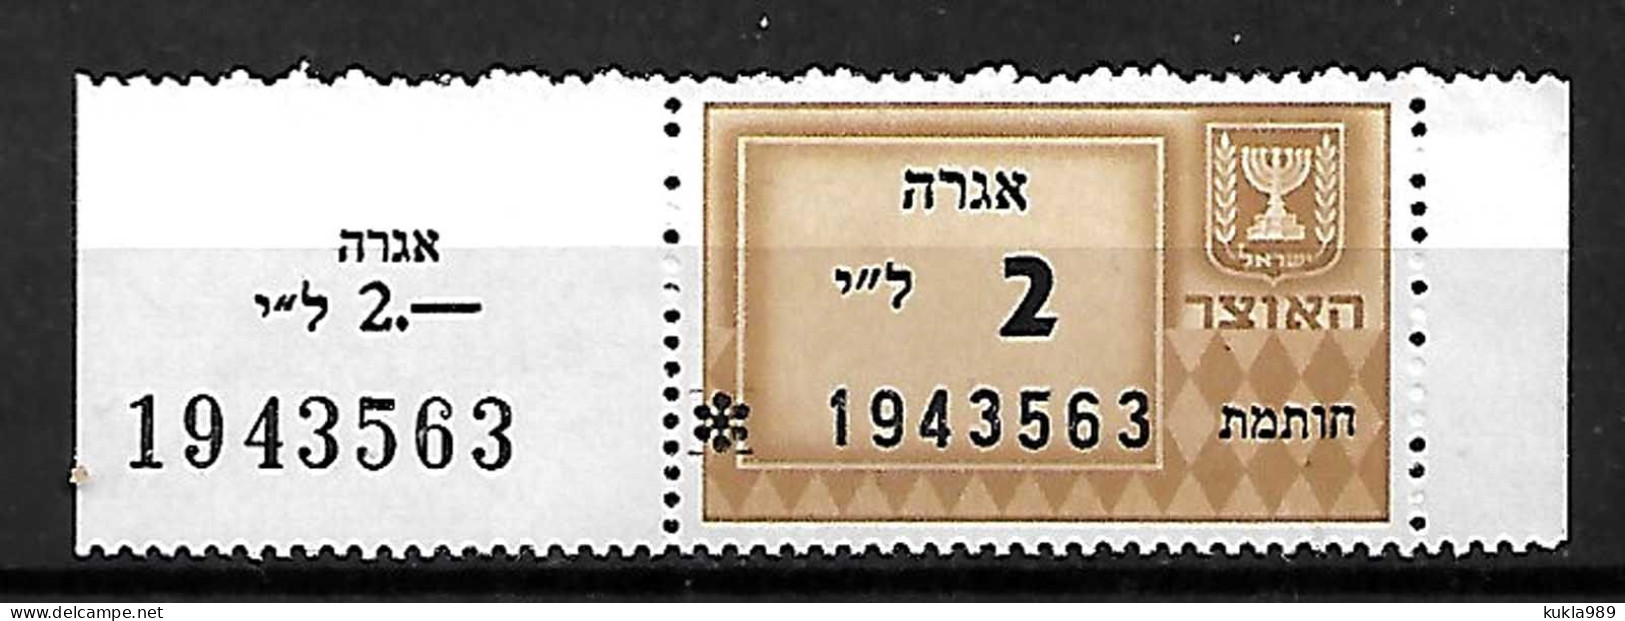 ISRAEL, AGRA OFFICIAL STATE REVENUE STAMP 1960, 2L., TAB, MNH - Ungebraucht (mit Tabs)